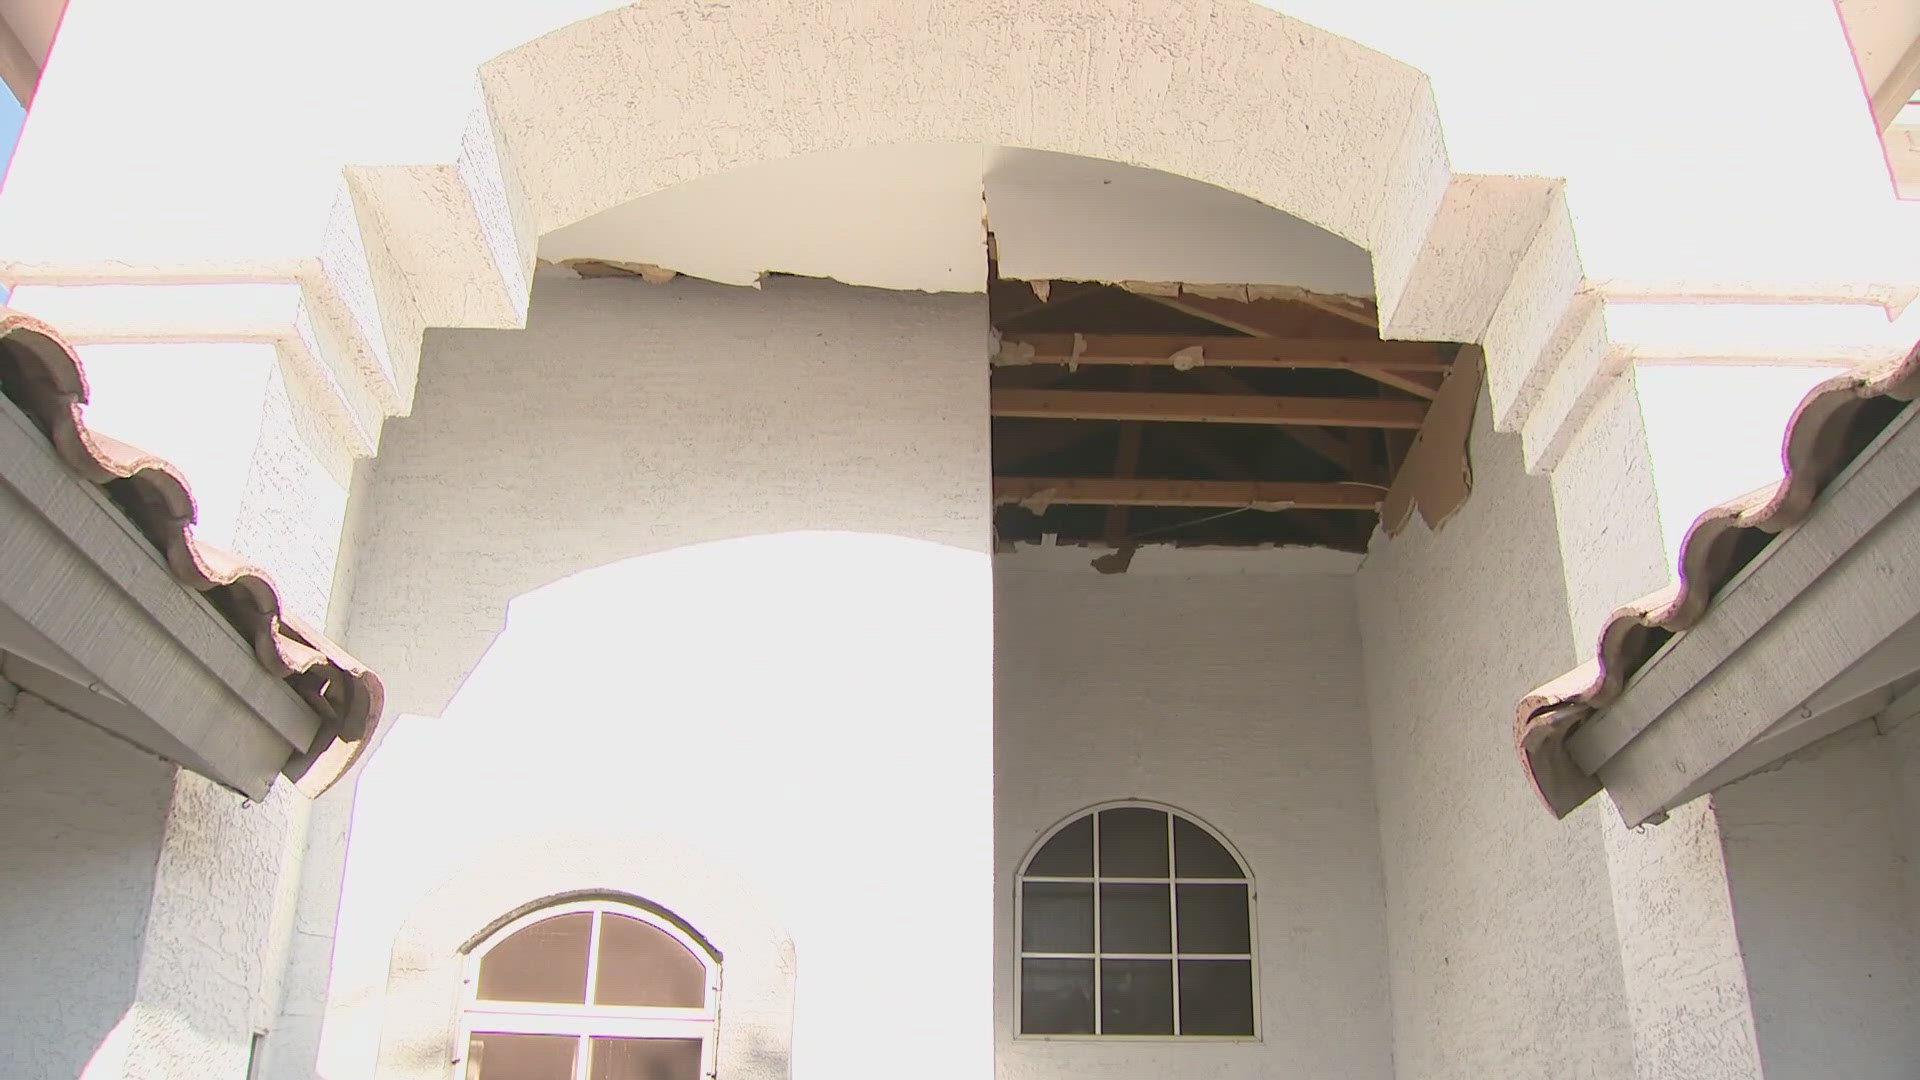 Two Phoenix residents have been arrested for allegedly throwing a firework at a Mesa residence and causing significant damage to the home.